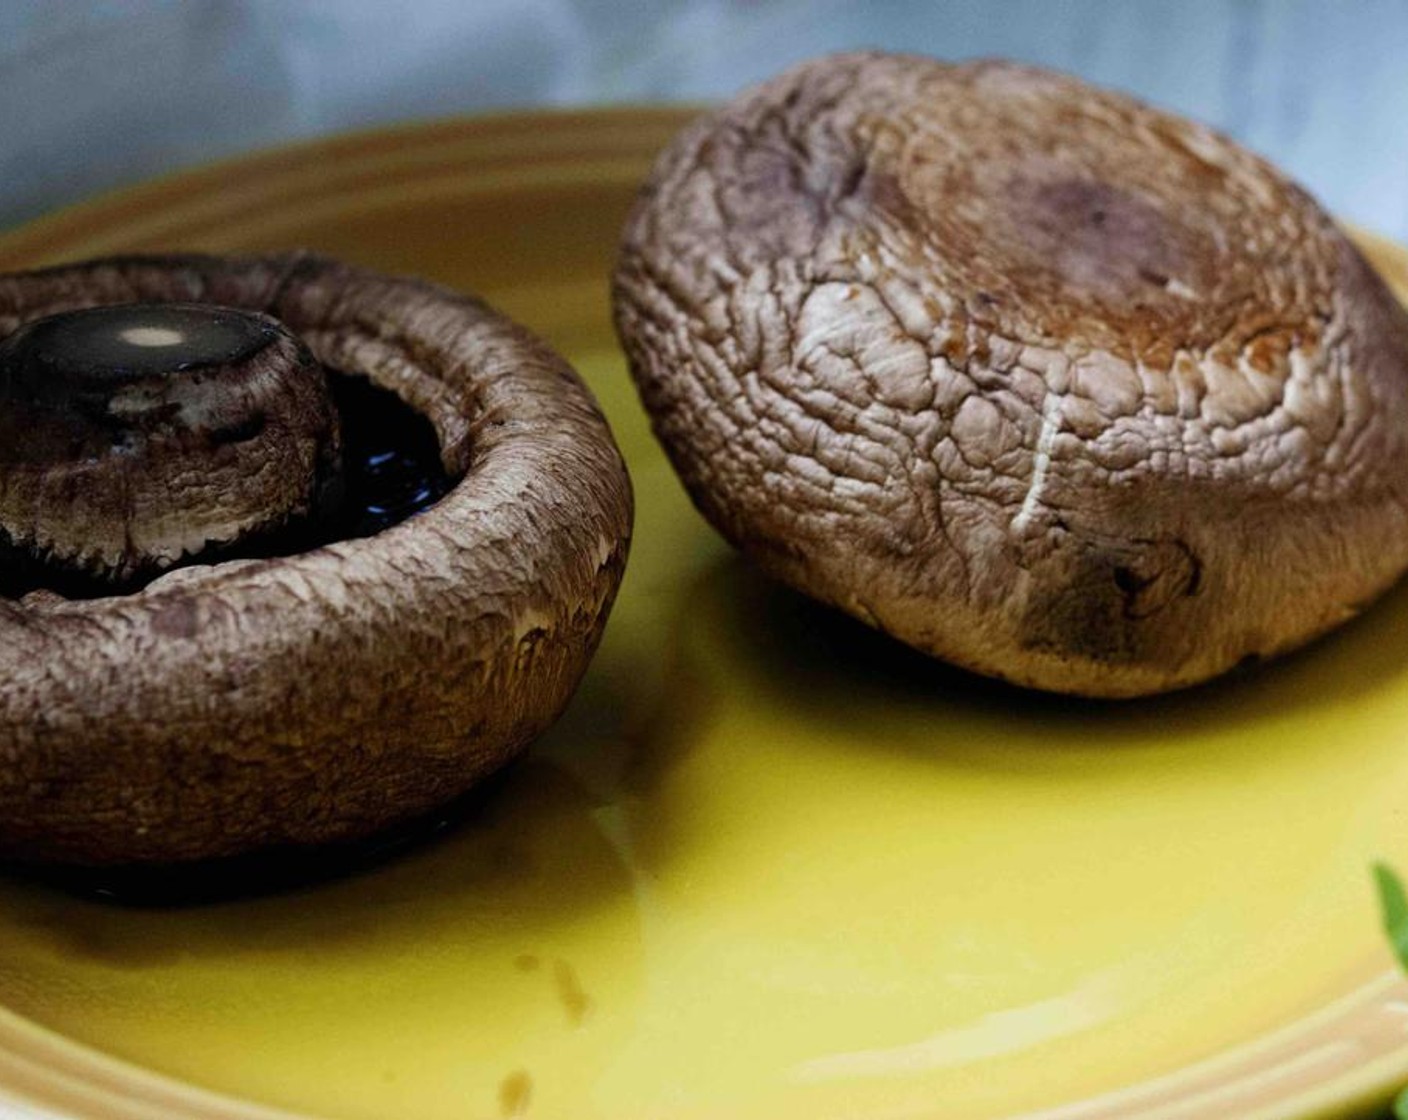 step 2 Season the Large Portobello Mushrooms (2) with Salt (to taste) and Ground Black Pepper (to taste) and grill for 10 minutes.